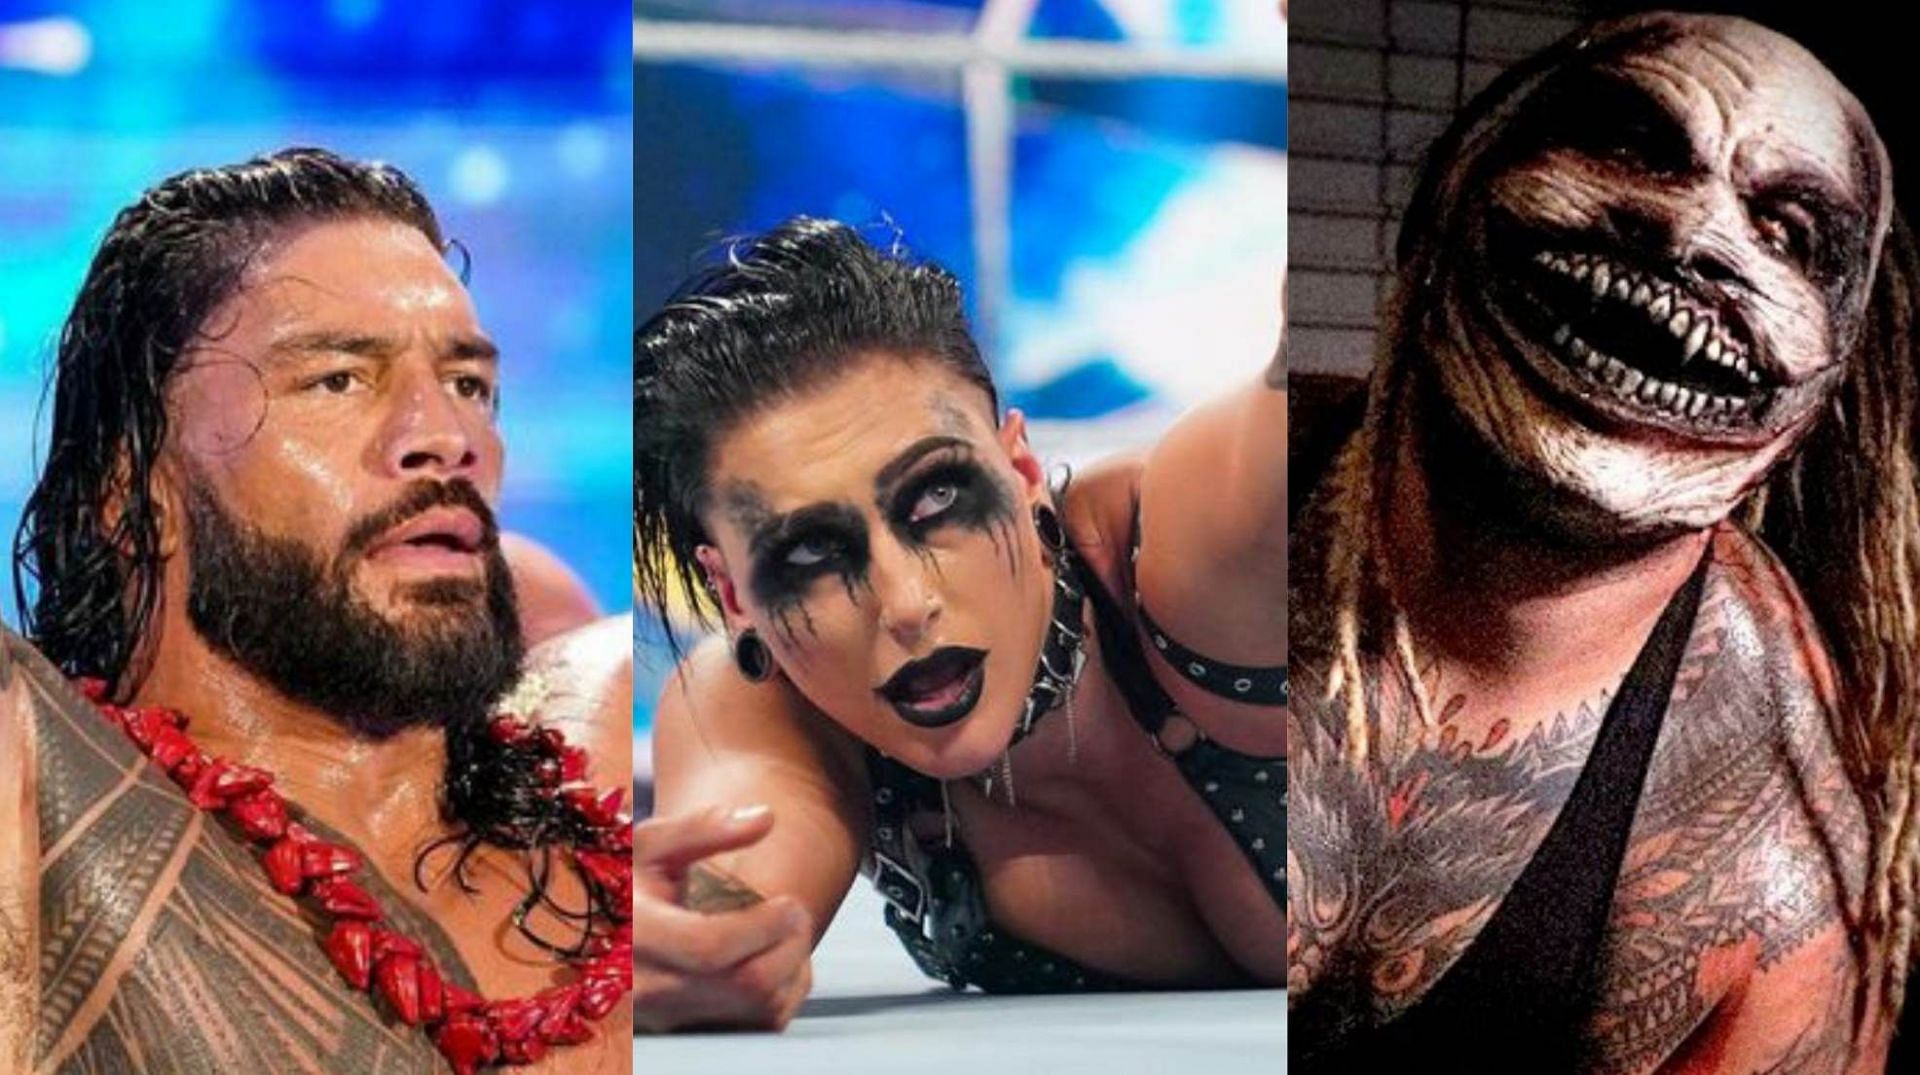 Several major moments could take place this year in WWE